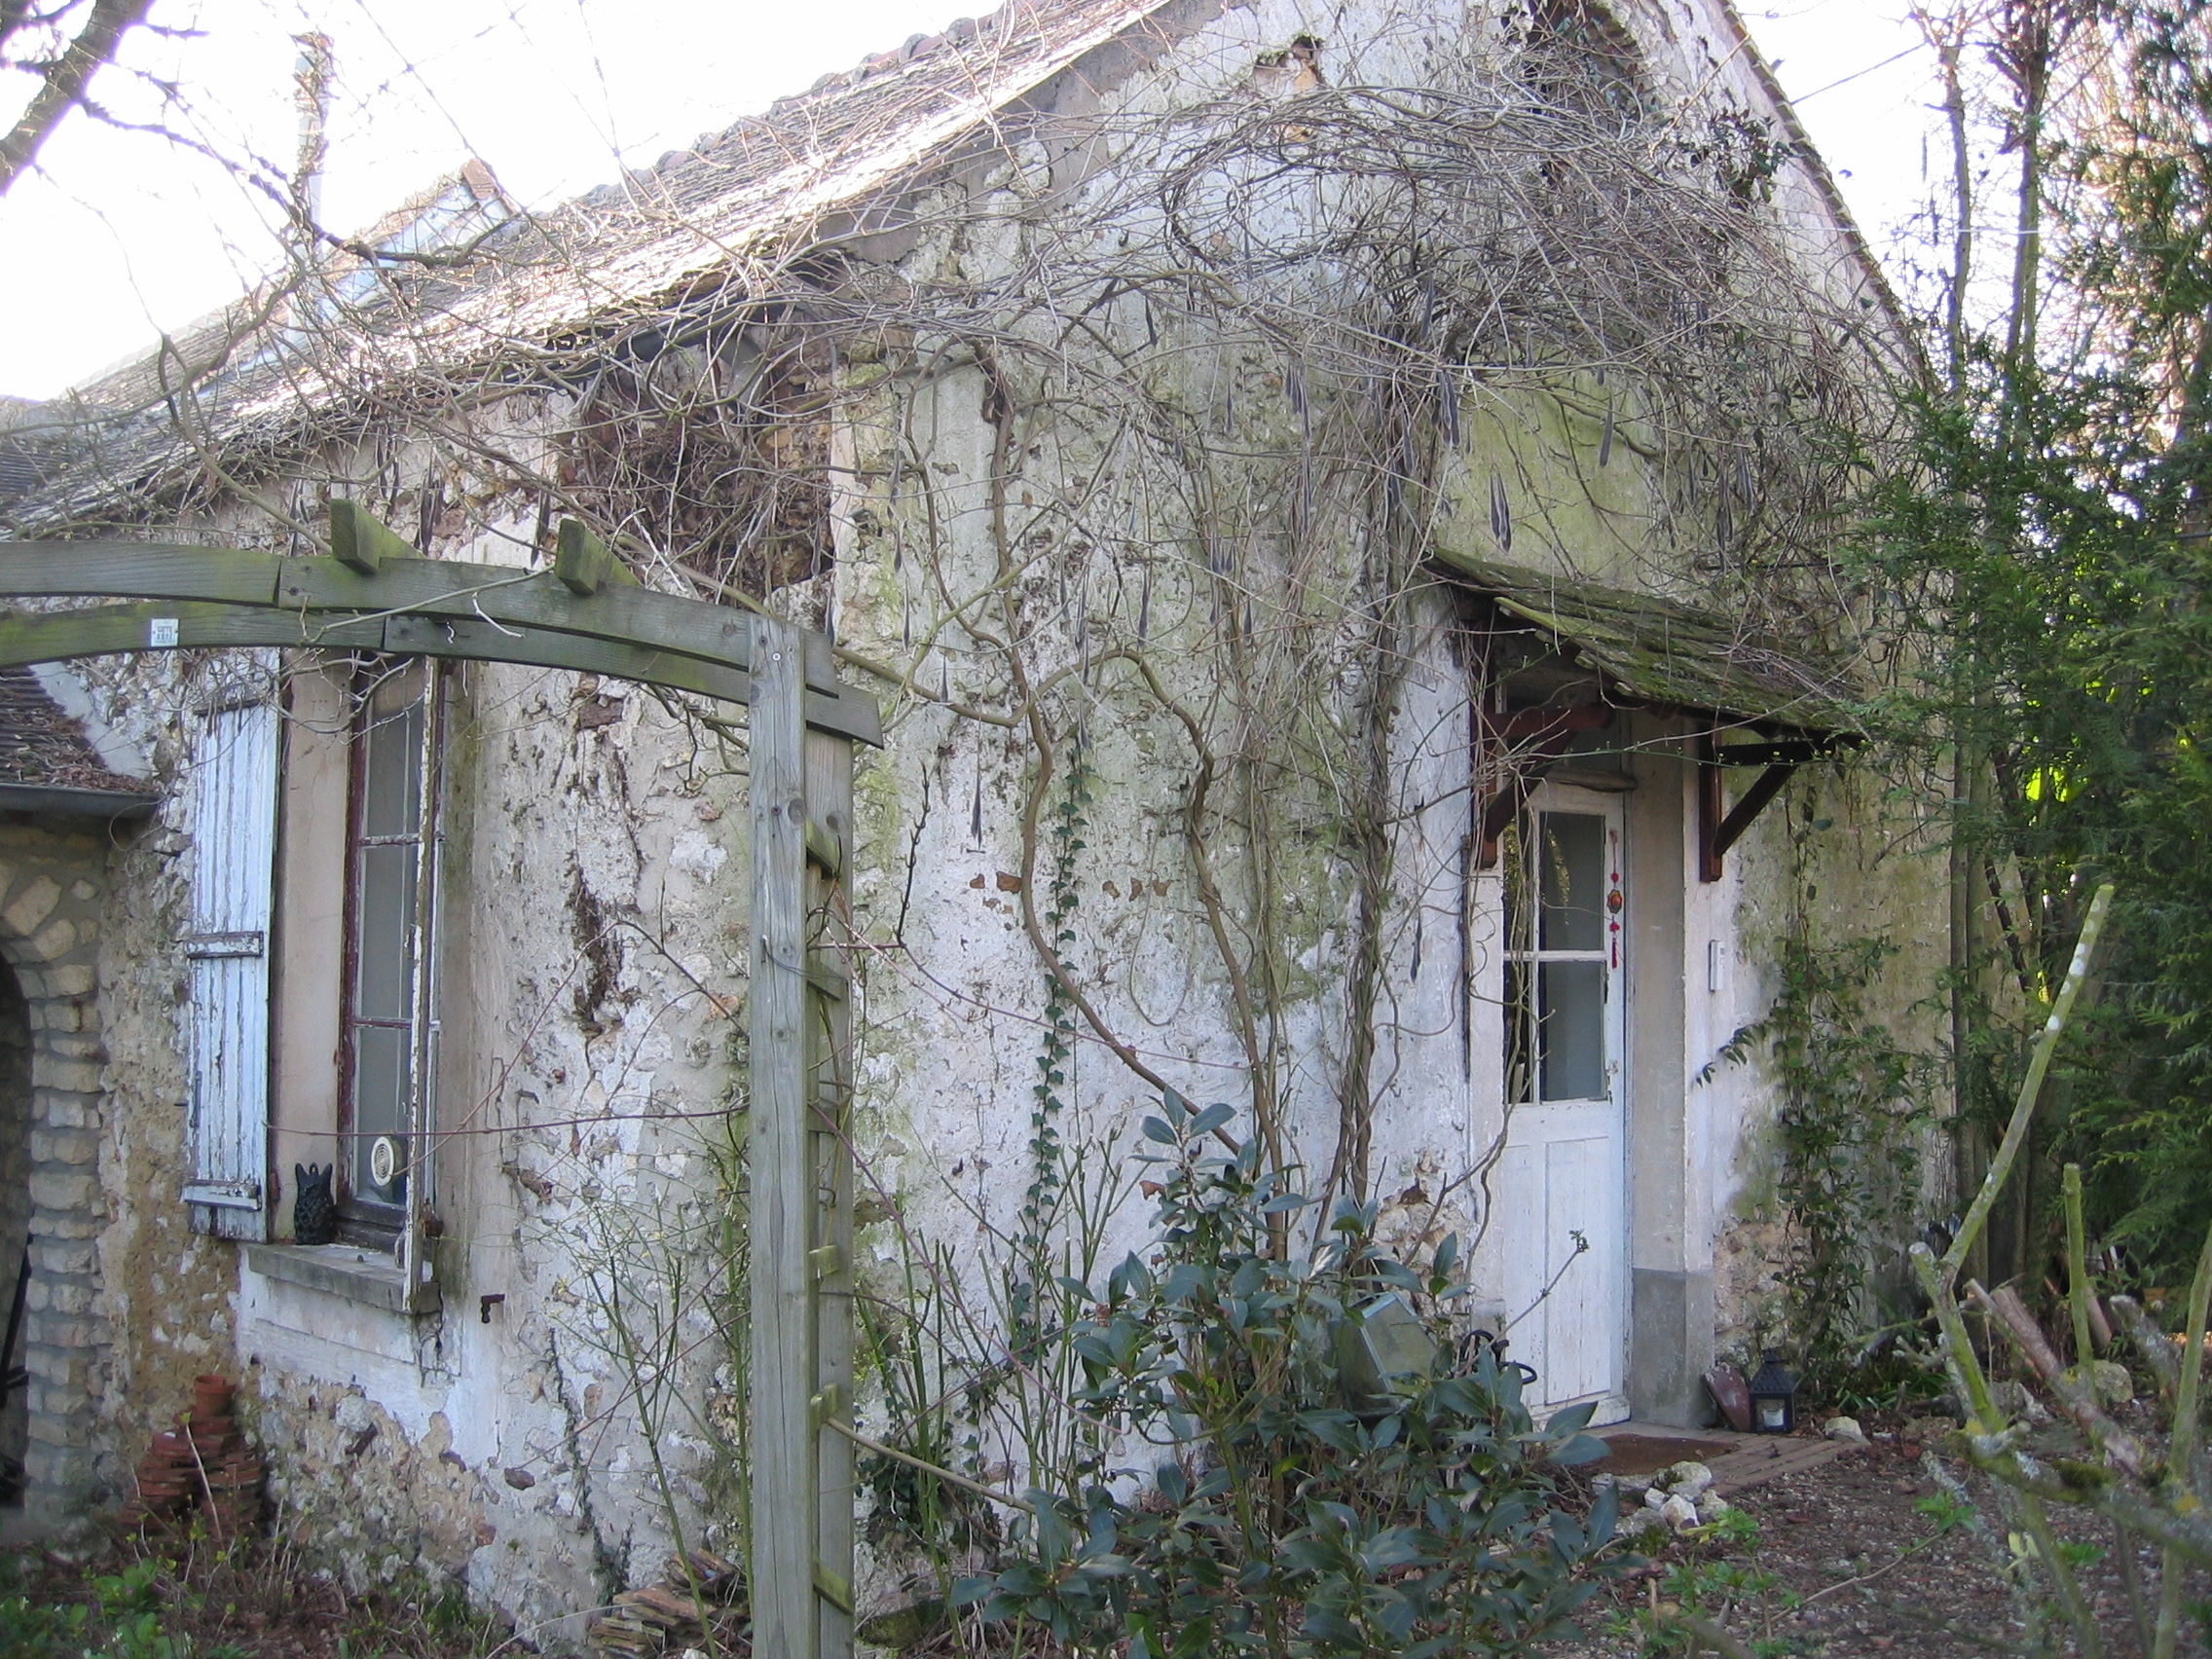 MY former studio in Septeuil, France 2007-2008.